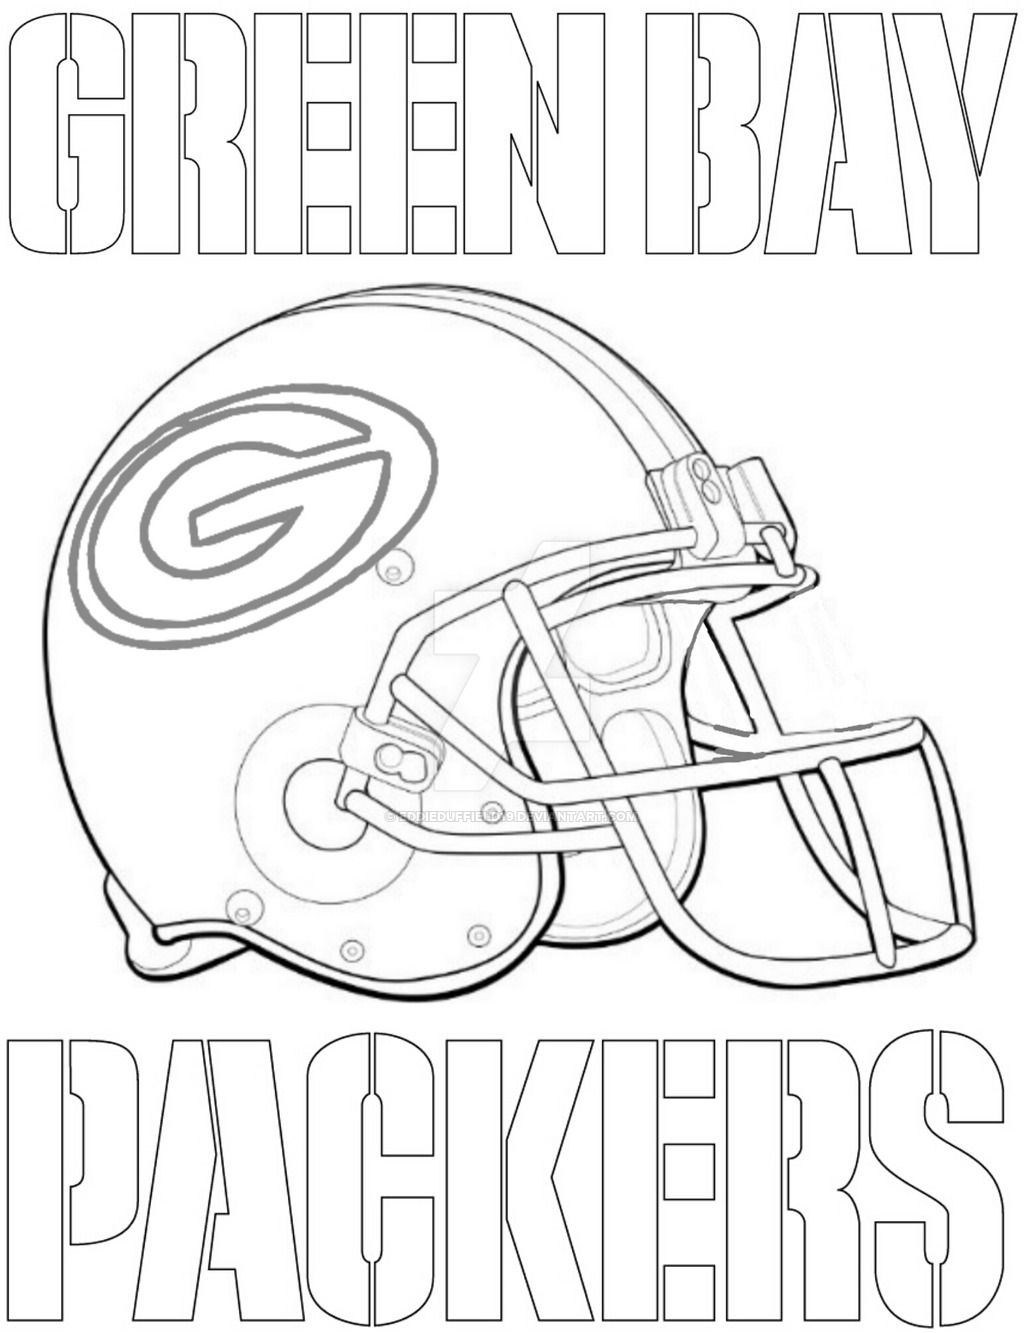 16 Pics of Green Bay Packers Football Helmet Coloring Pages ...